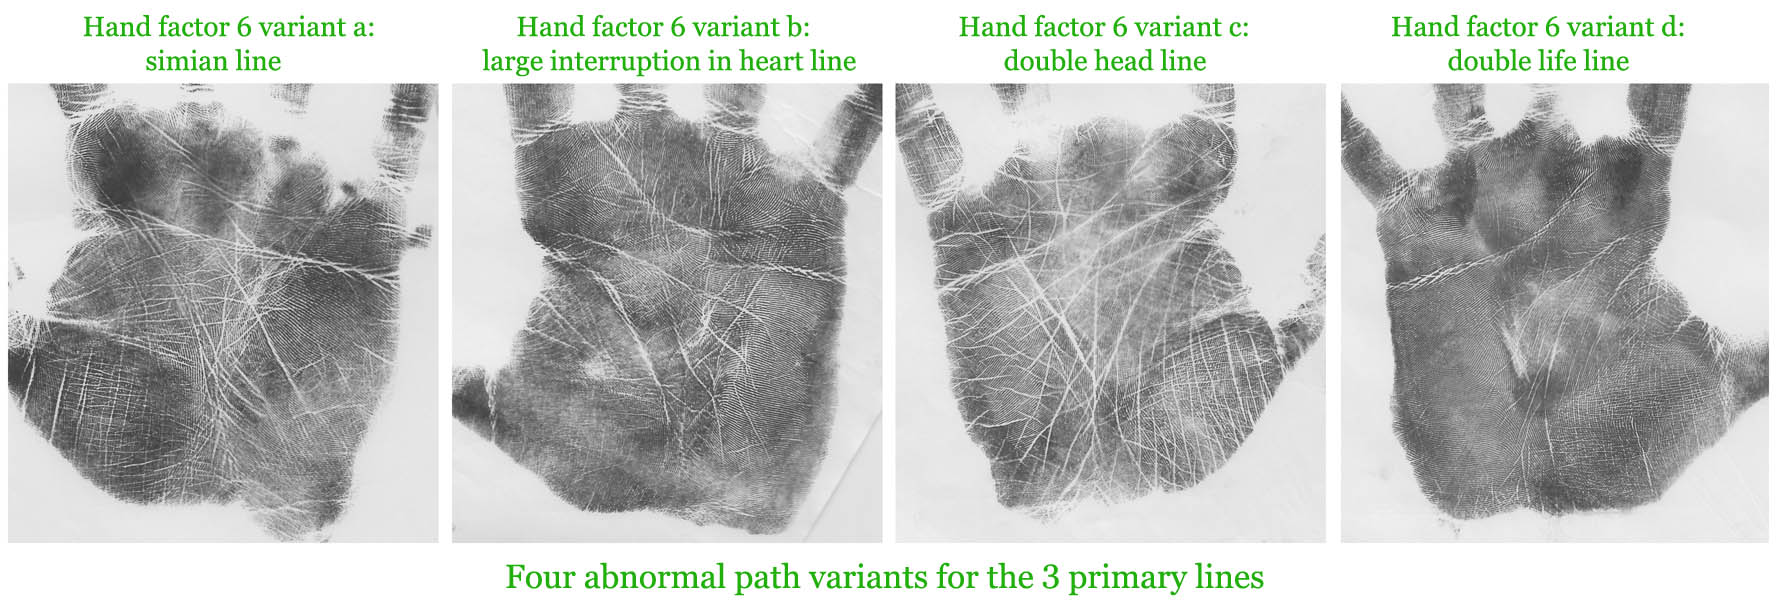 4 Abnormal path variants for the 3 primary lines.